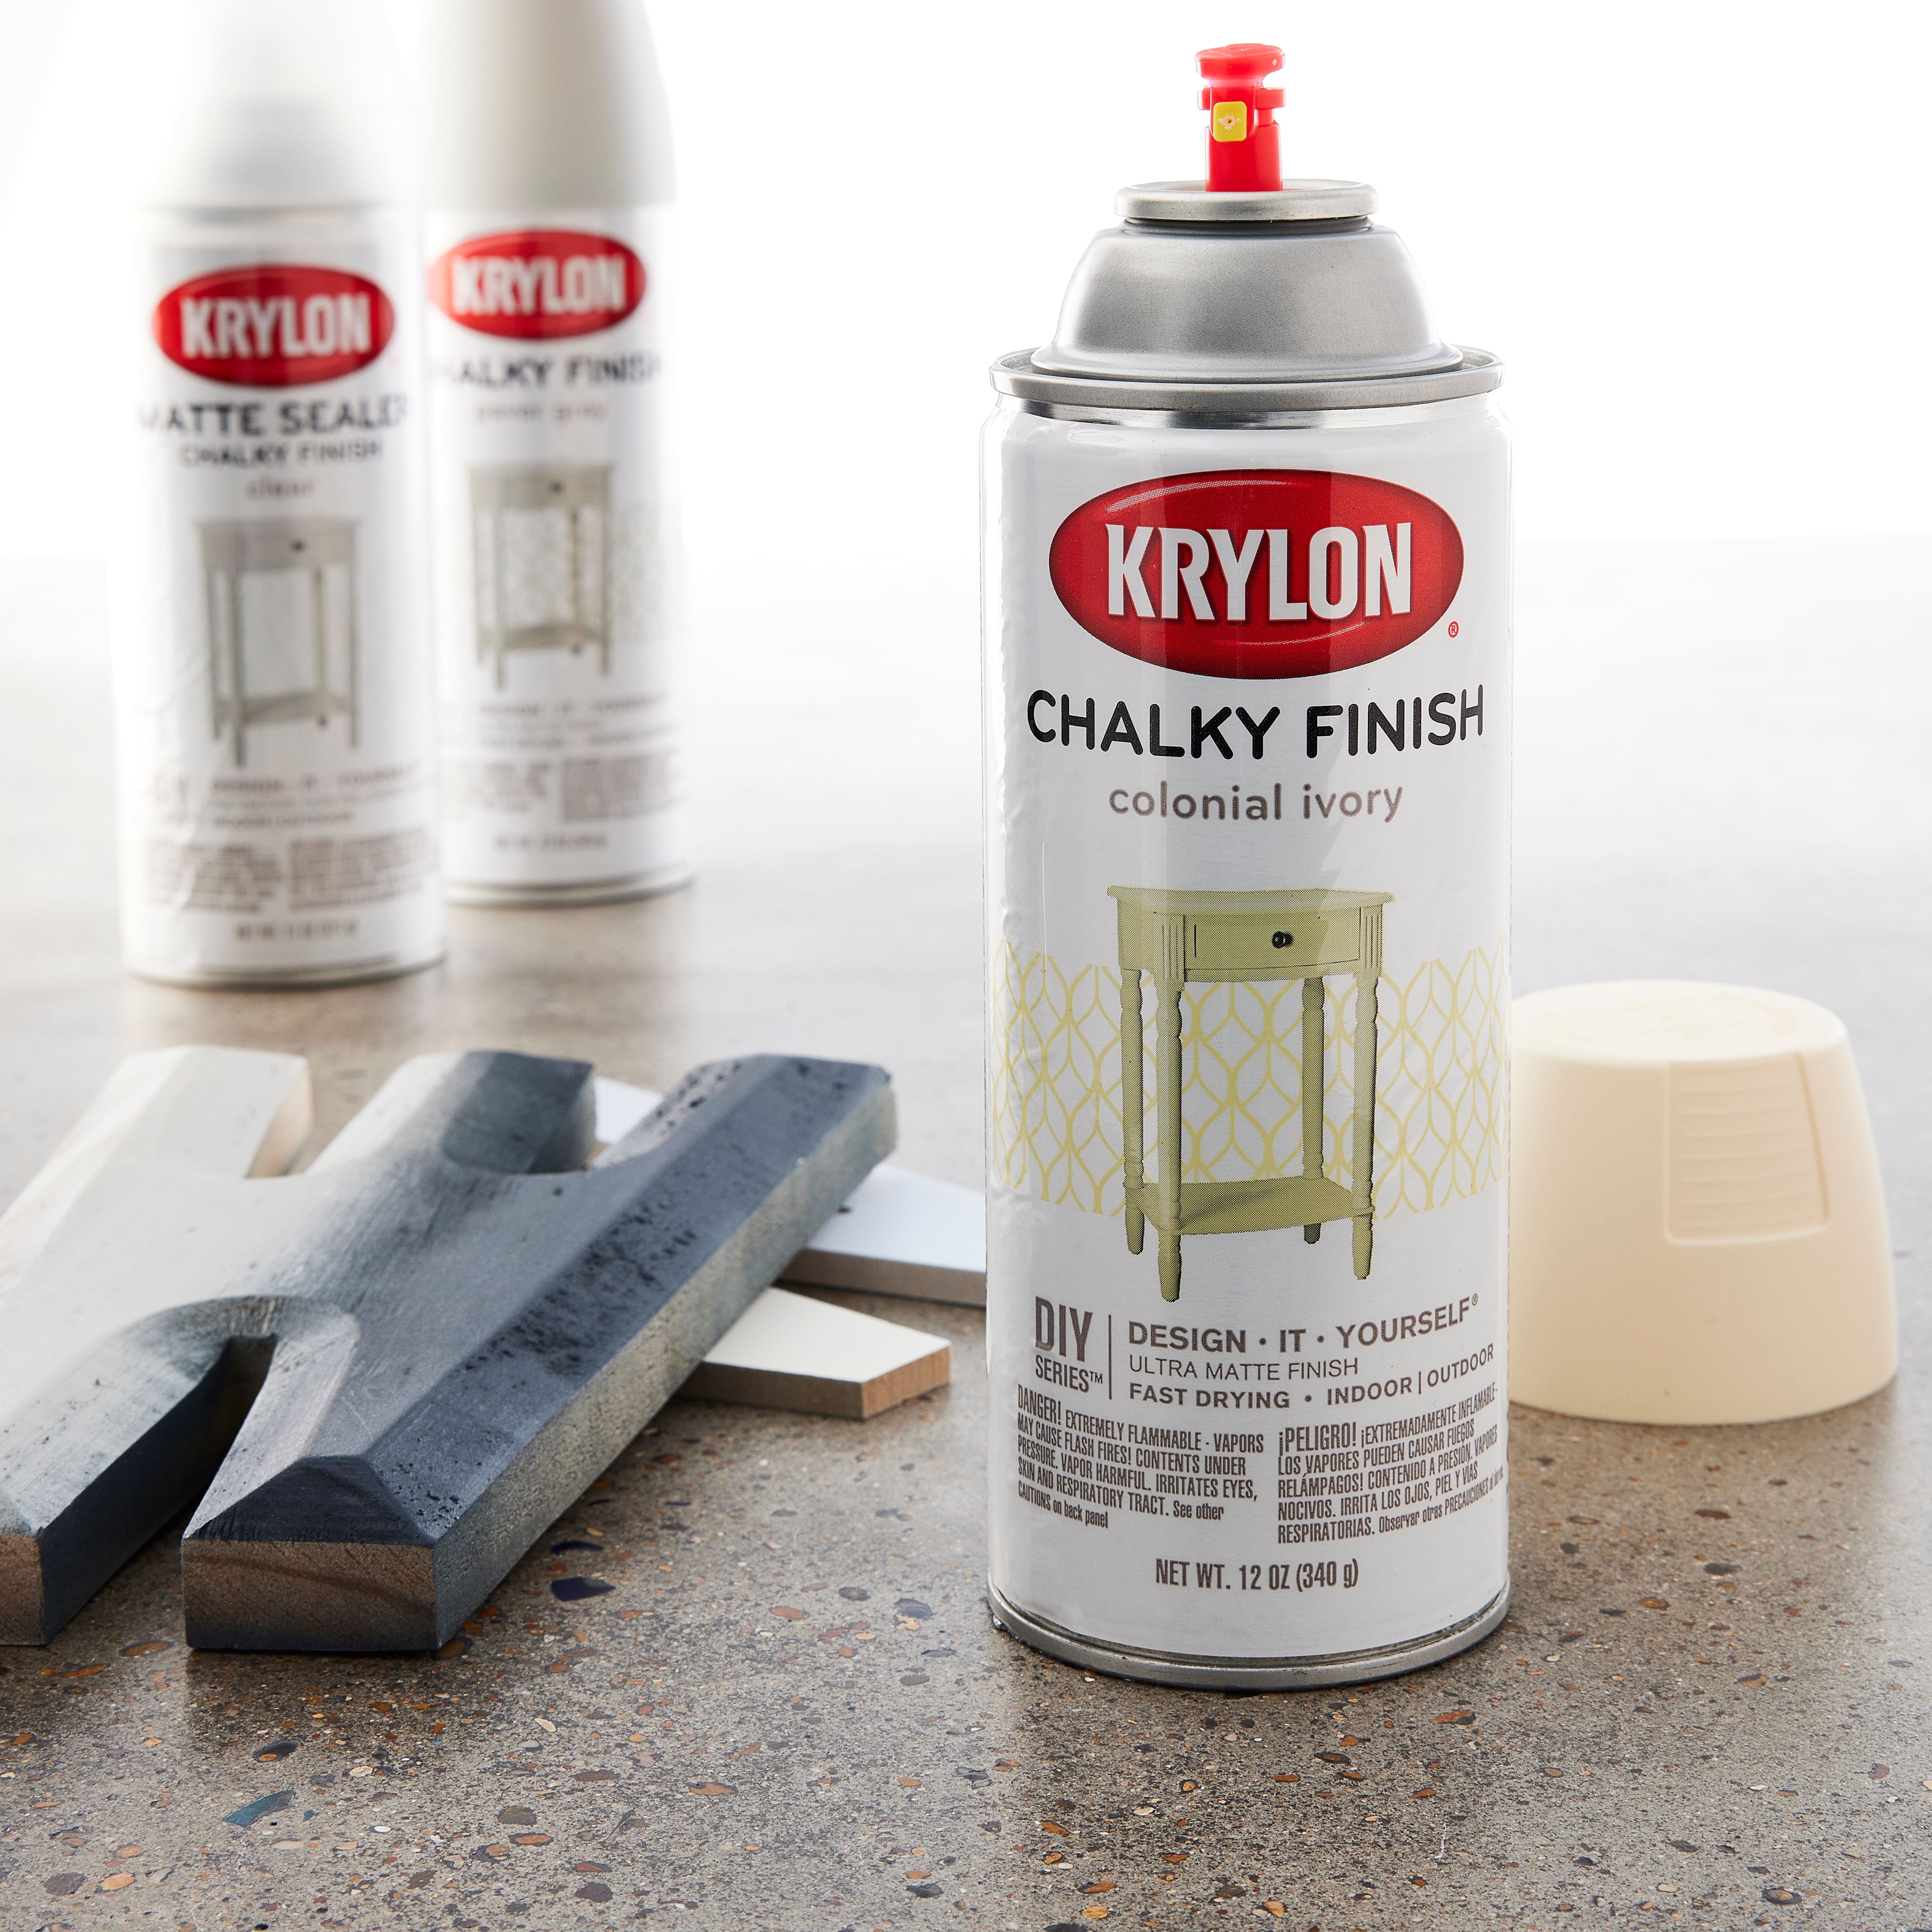 Krylon Classic White Water-Based Chalky Paint (1-Quart) in the